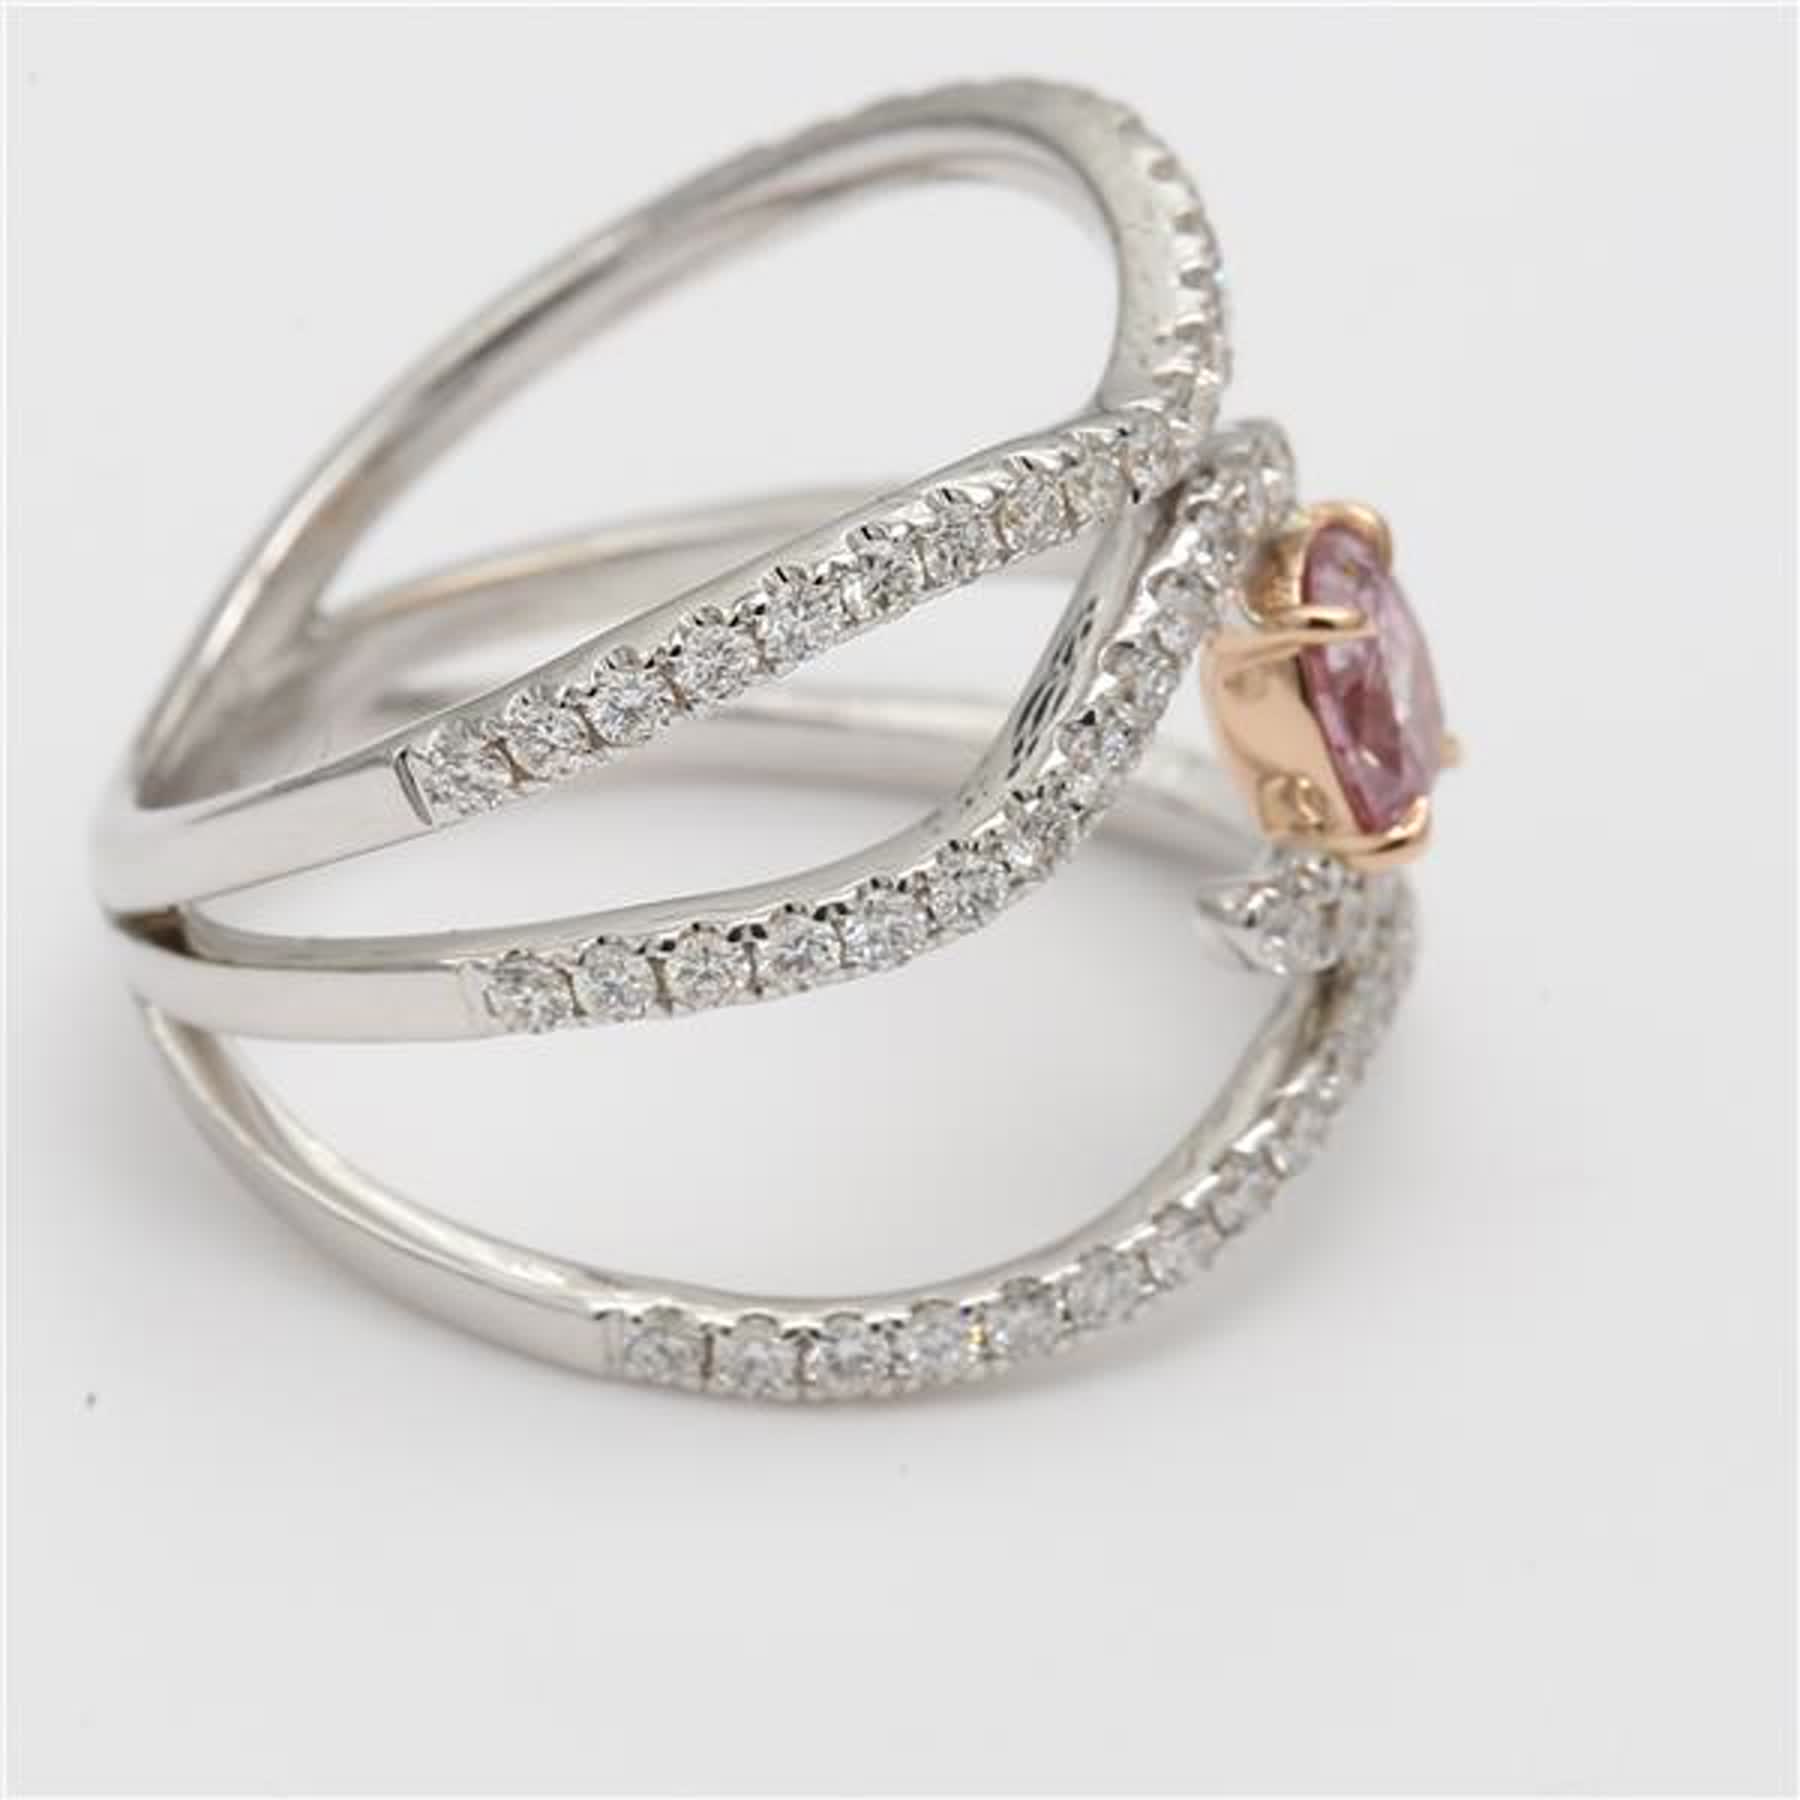 GIA Certified Natural Pink Oval and White Diamond 1.08 Carat TW Rose Gold Ring